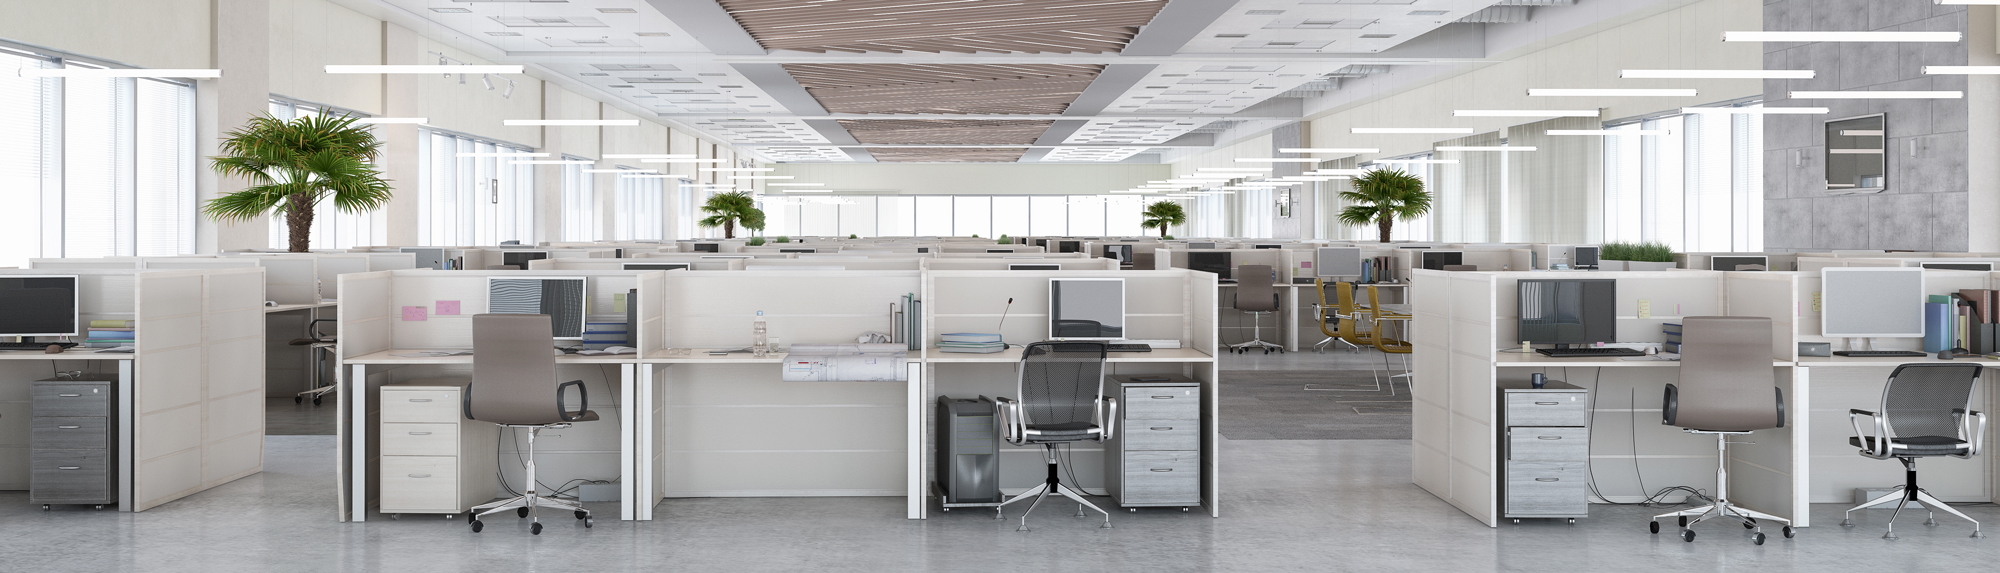 The Future of Open Office Plans